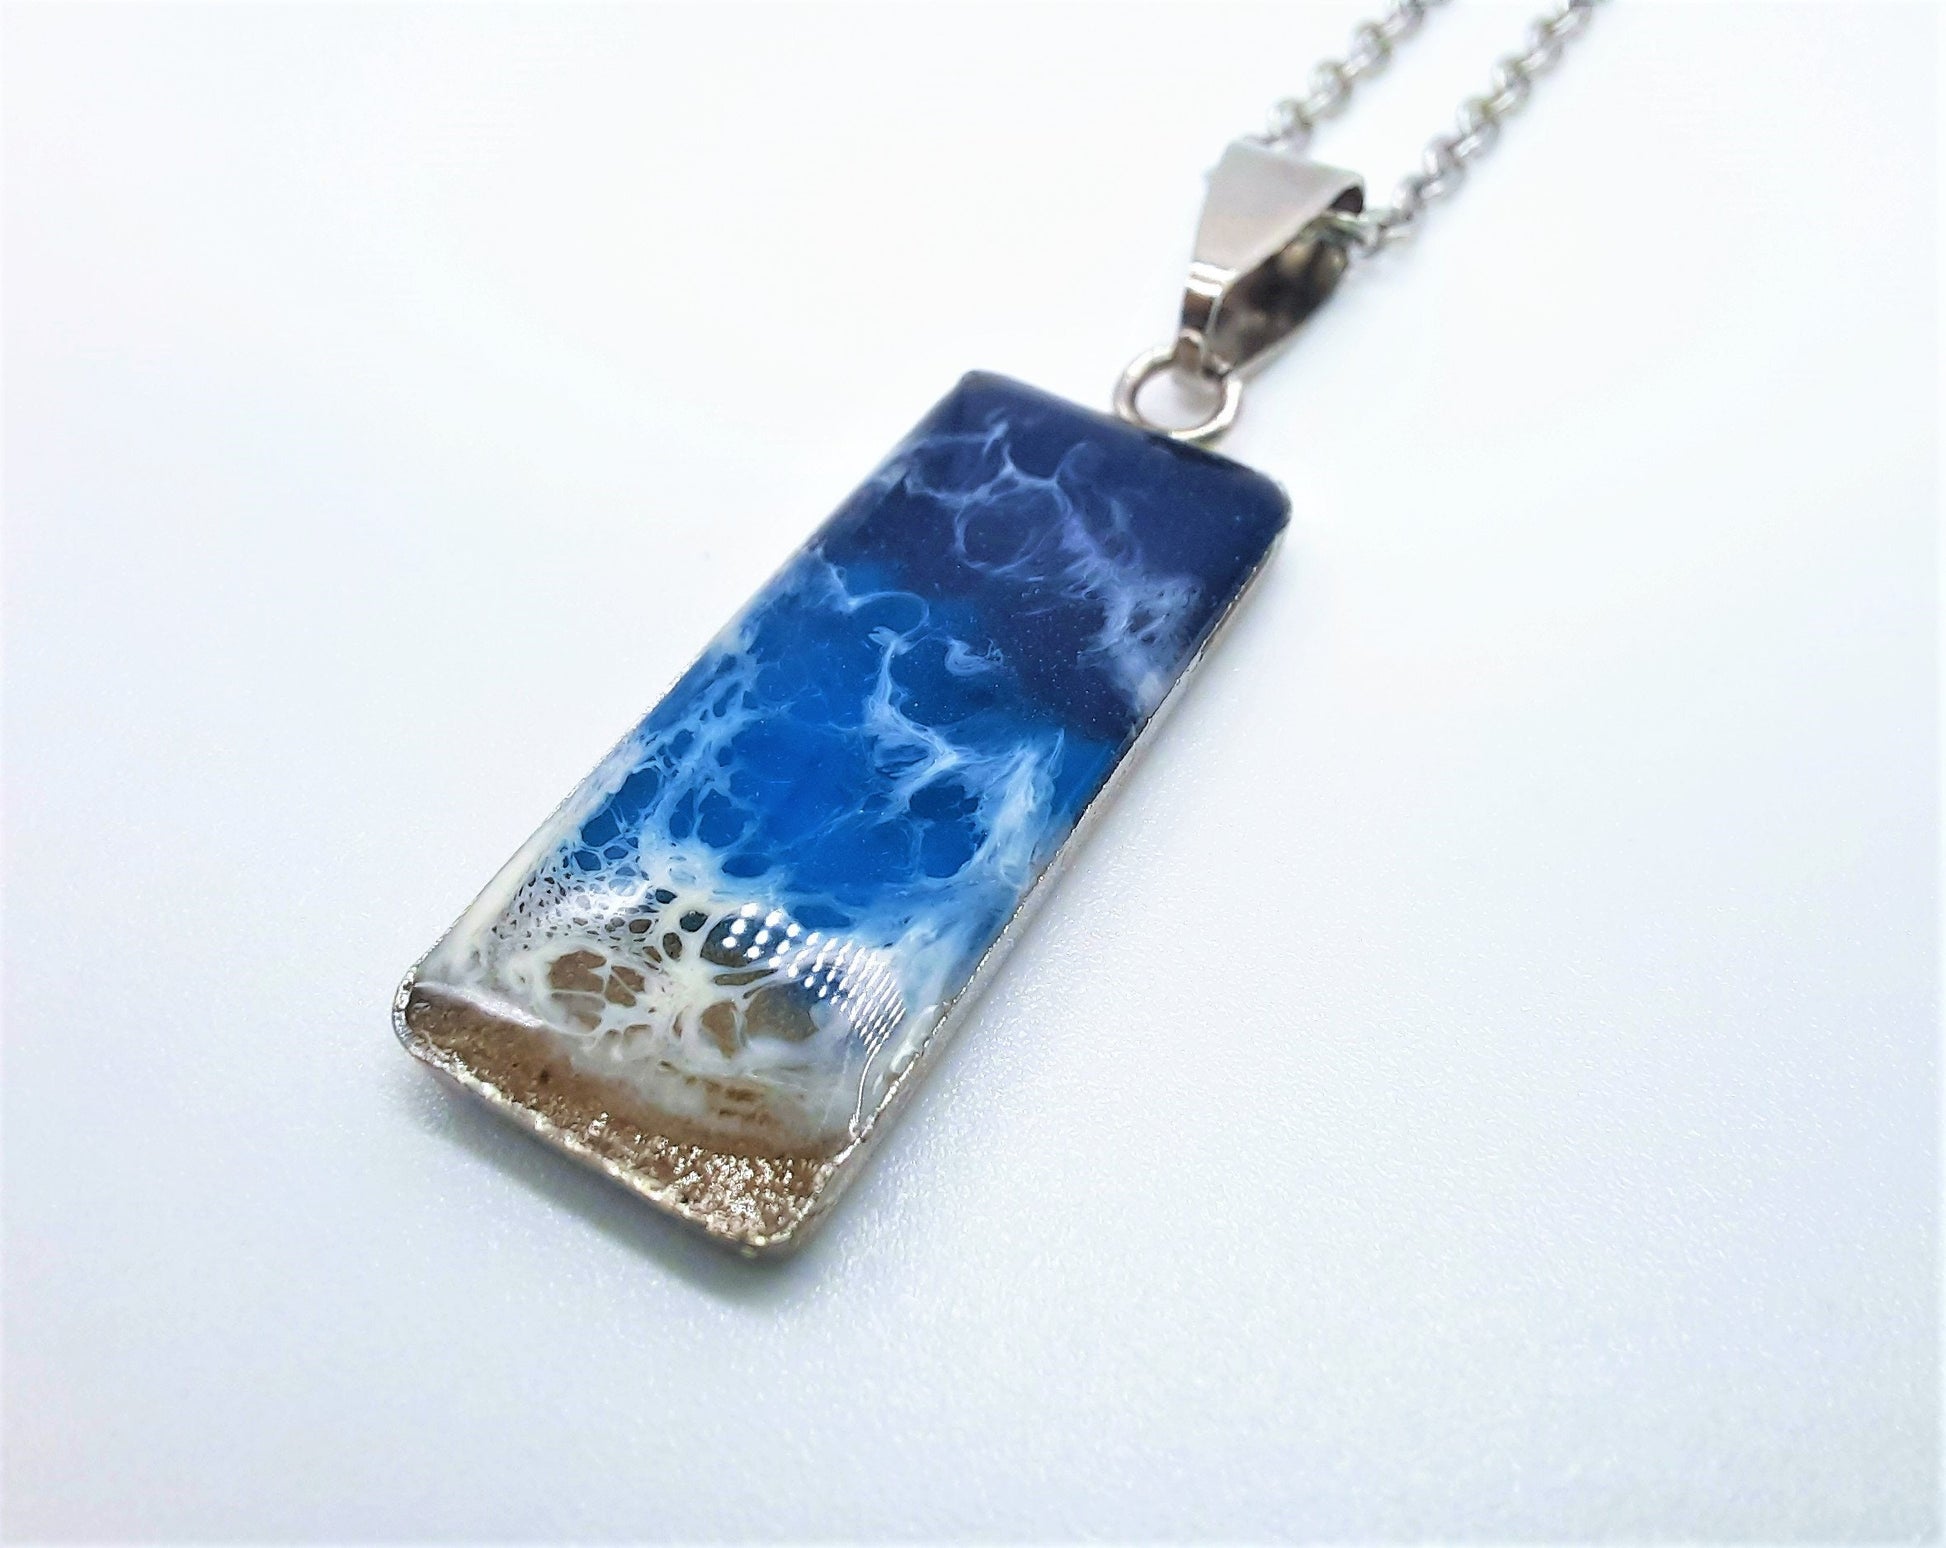 Resin Waves Rectangle Shaped Ocean Pendant / Beach Scene Necklace, Handmade Made with Resin & Real Sand - One of a Kind - Not a Photograph!